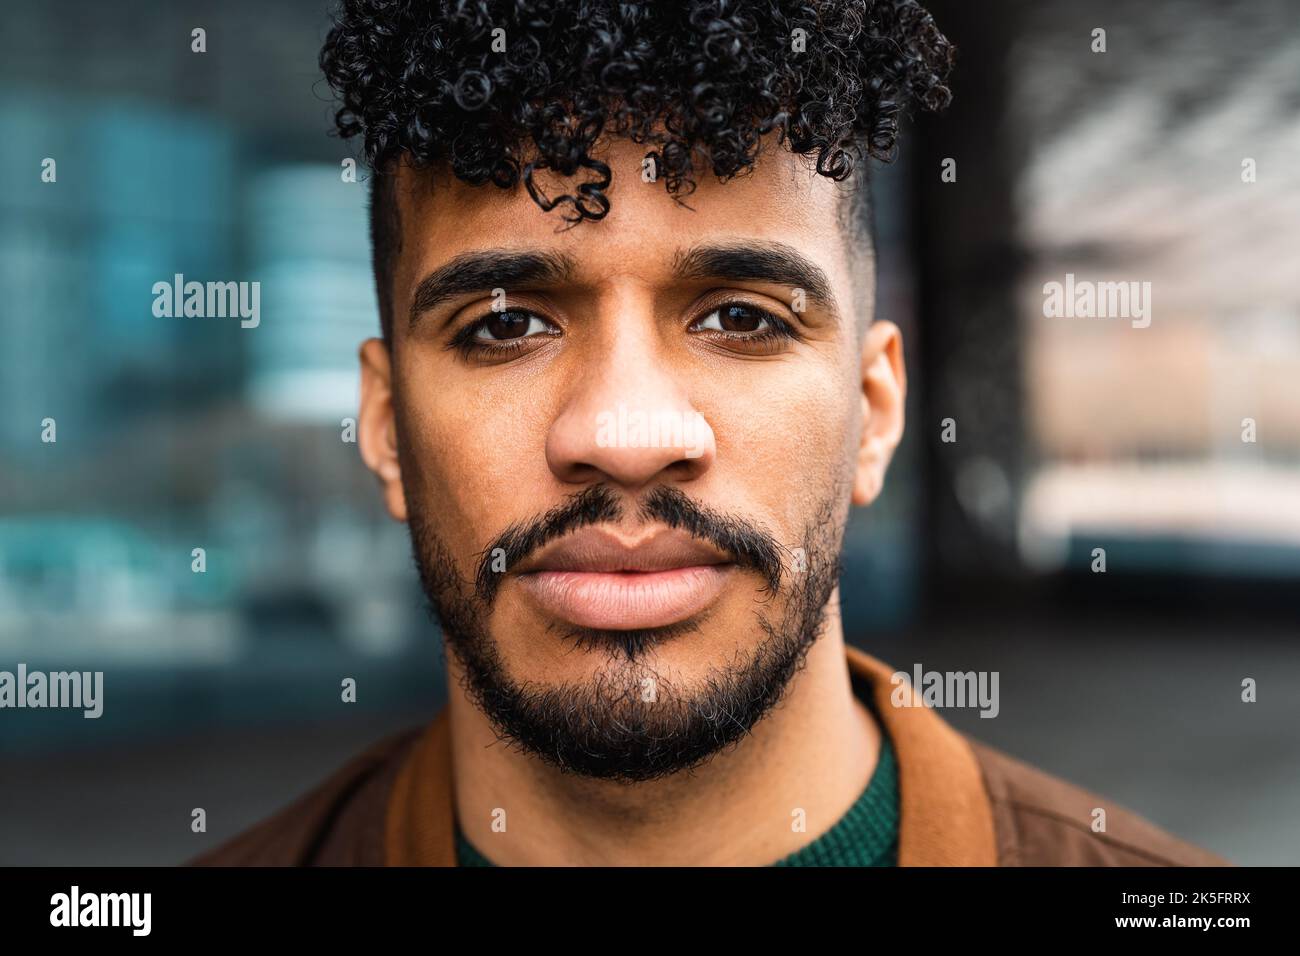 Young Latin man portrait looking in front of camera Stock Photo